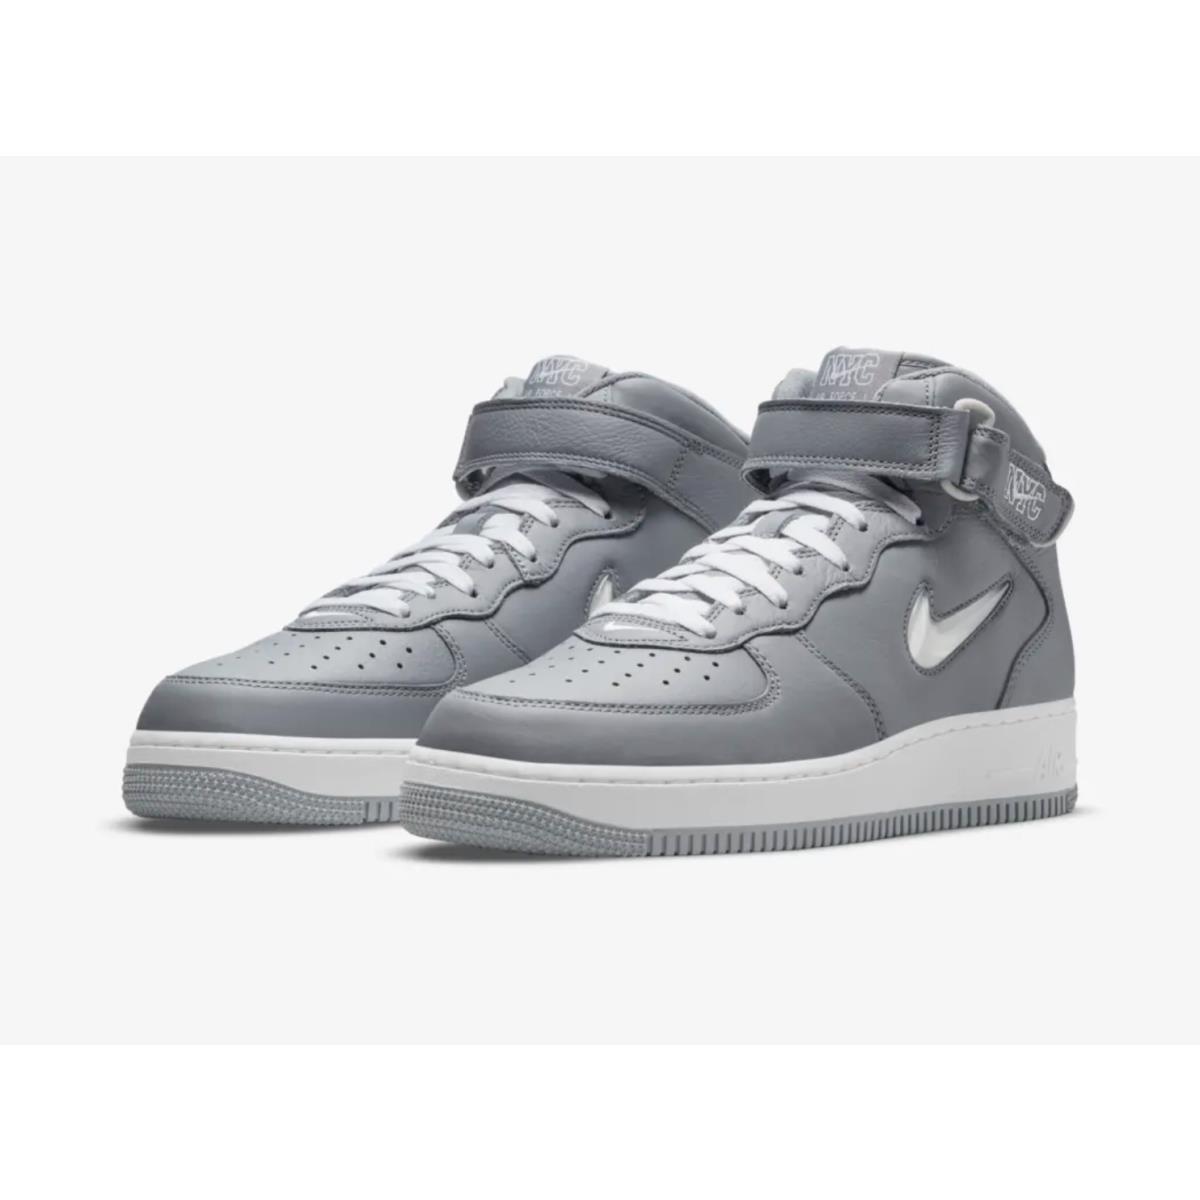 Nike Air Force 1 Mid QS Shoes Nyc Cool Grey White DH5622-001 Men`s Size 10